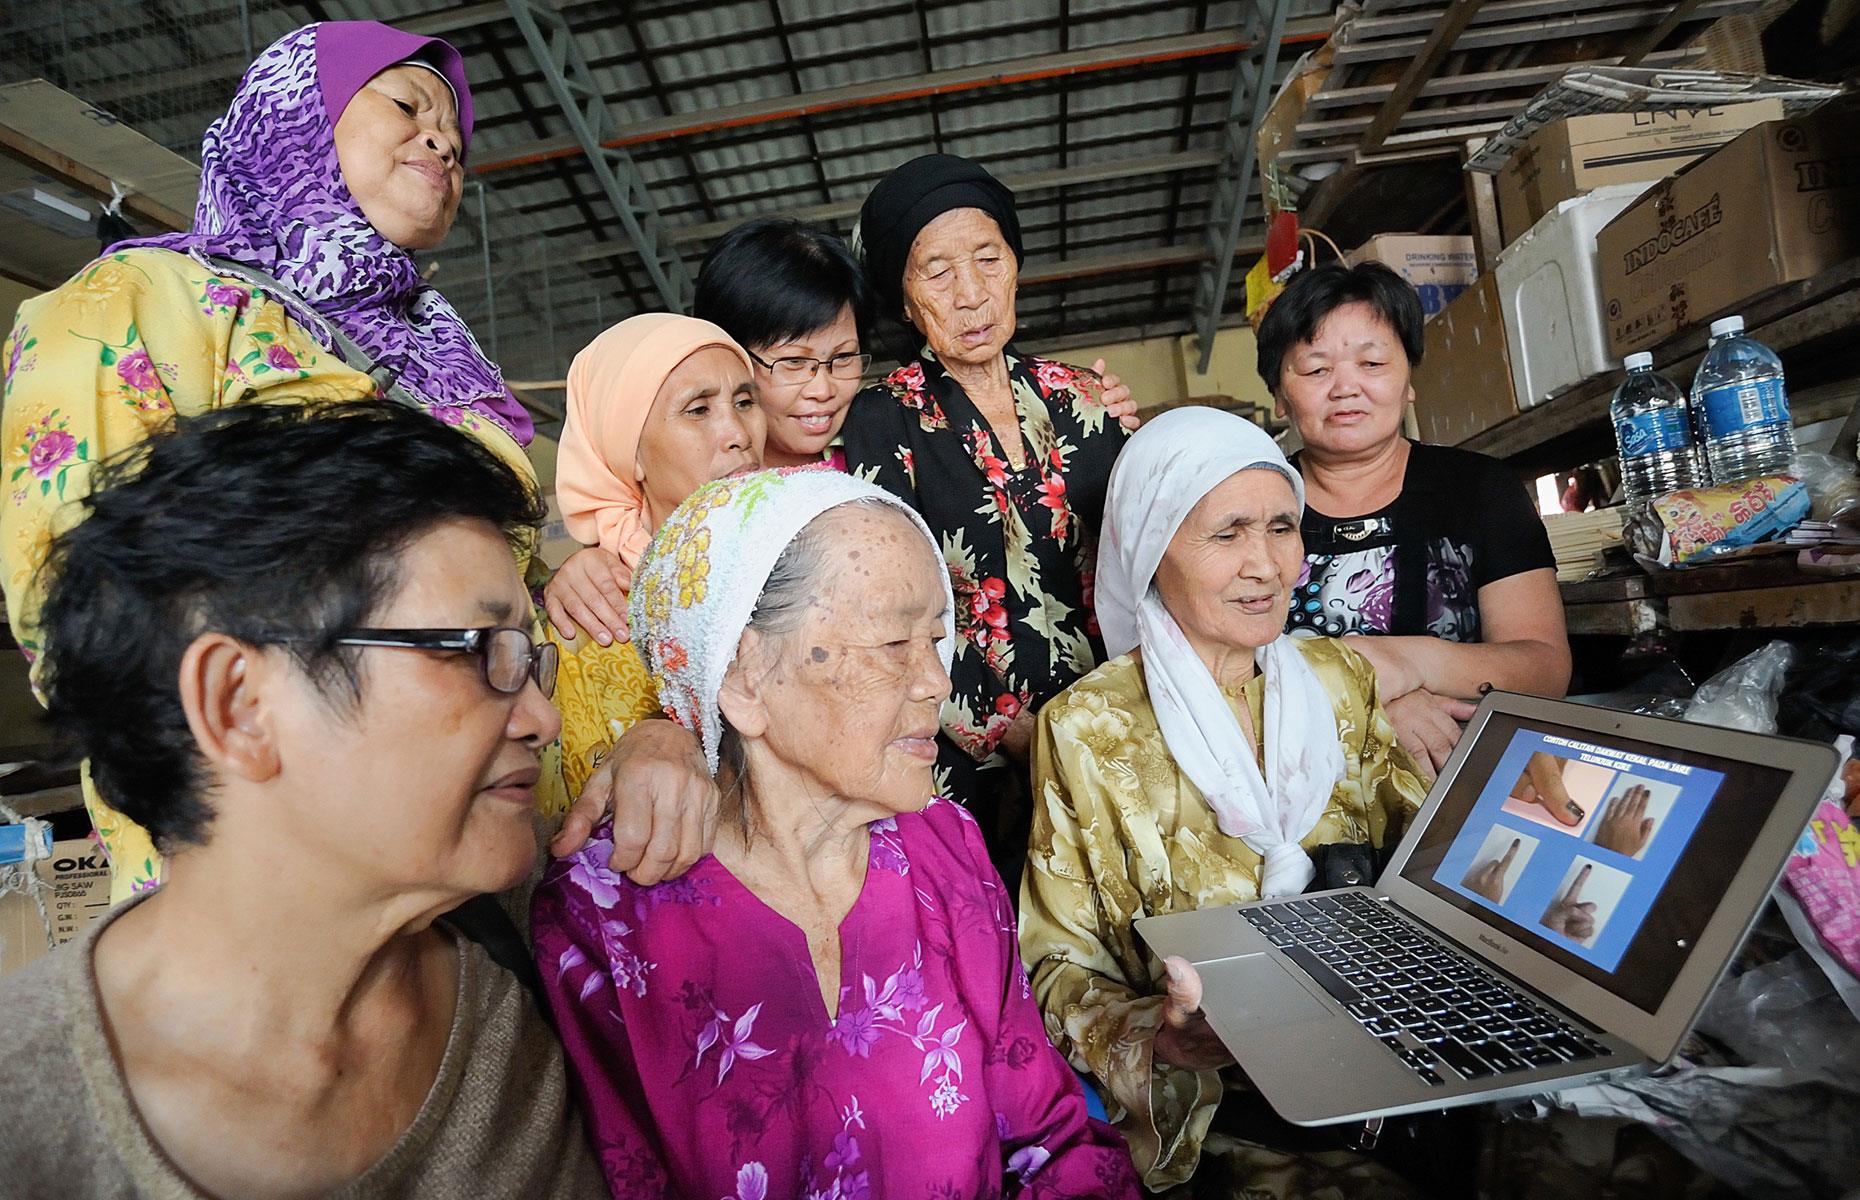 <p>Malaysians can expect to live to 76.4 years today, up from just under 47 in 1950. By 2050, average life expectancy is projected to hit 80.8.</p>  <p>As in Mexico, the increase in Malaysia's life expectancy has somewhat slowed this century. In this case, the culprit is mainly insufficient education surrounding treatable, non-communicable diseases such as diabetes, heart disease, and preventable cancers. Other challenges the government and health authorities face include persistent pockets of poverty and healthcare disparities among segments of the population.</p>